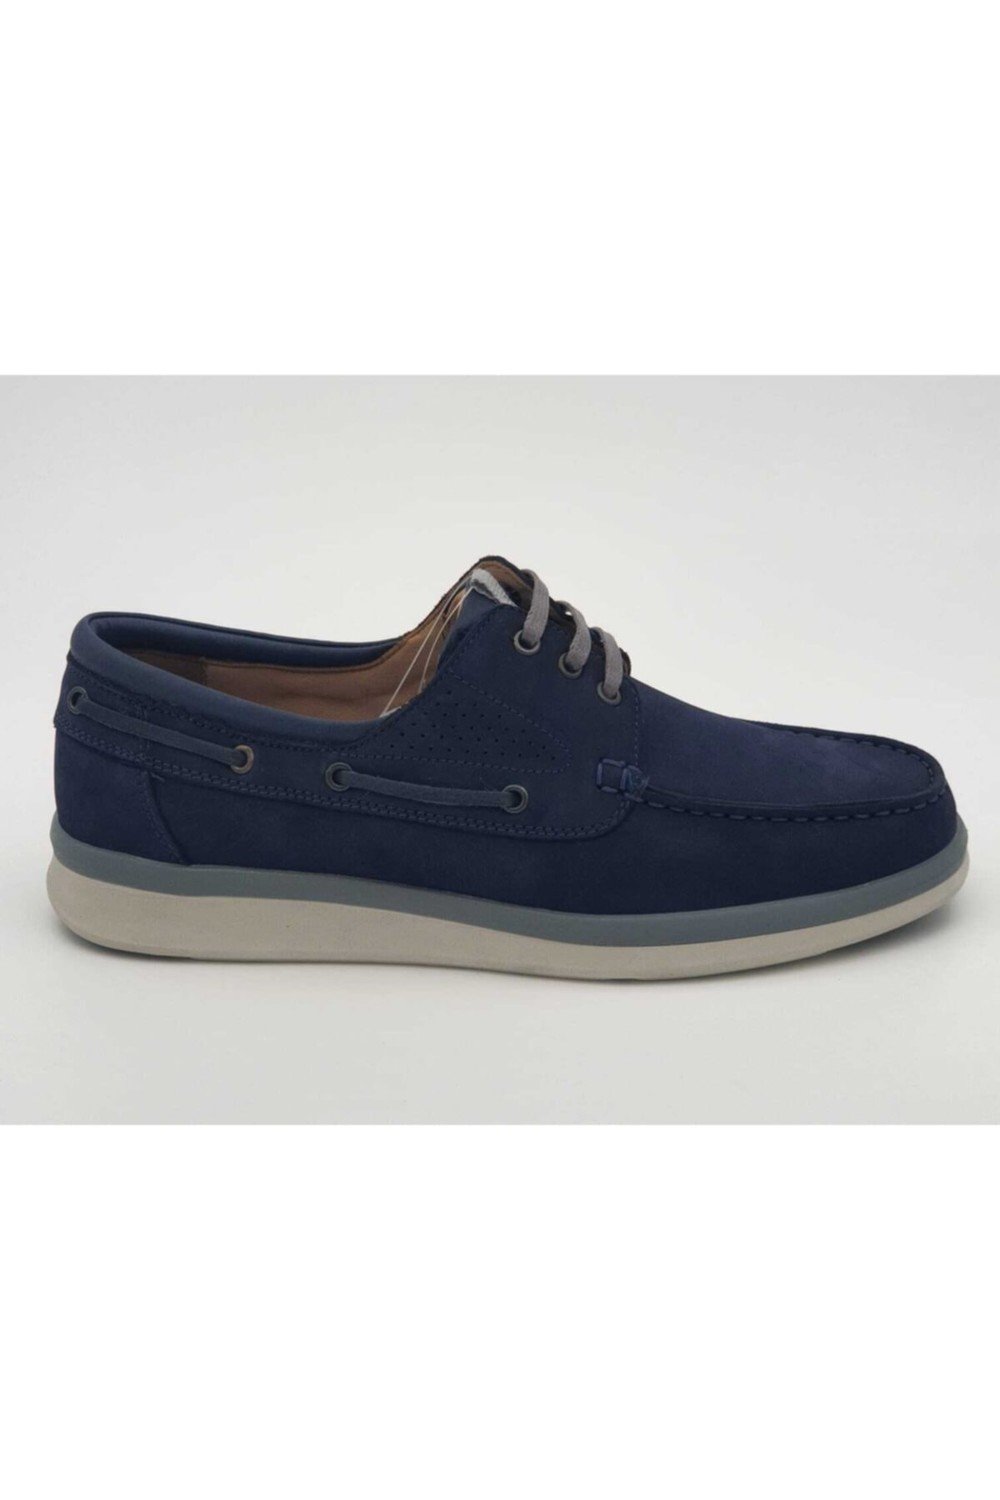 Forelli Business Shoes - Dark blue - Flat